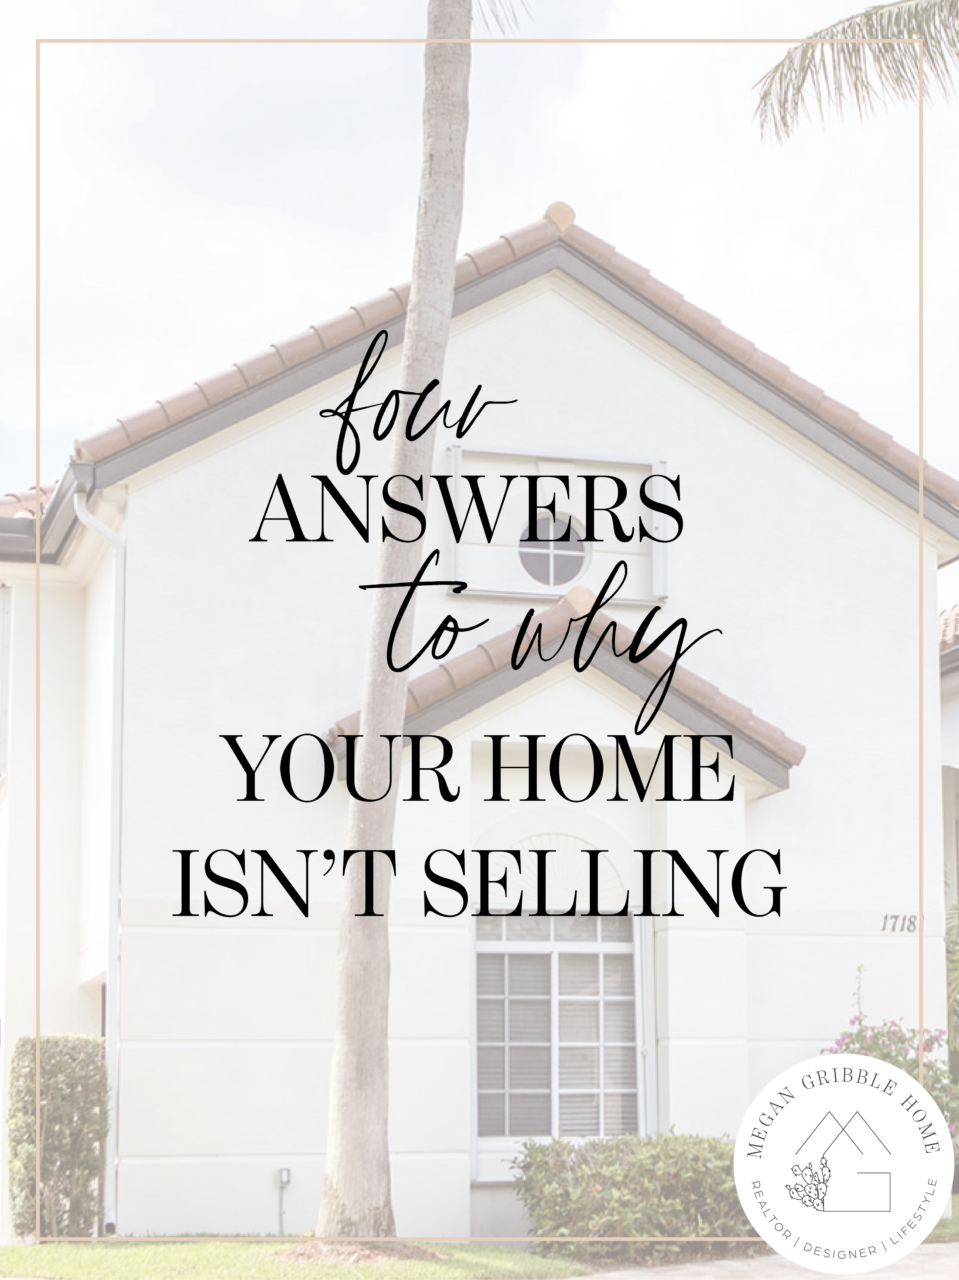 The Answers You Need to Why Your Home Isn’t Selling